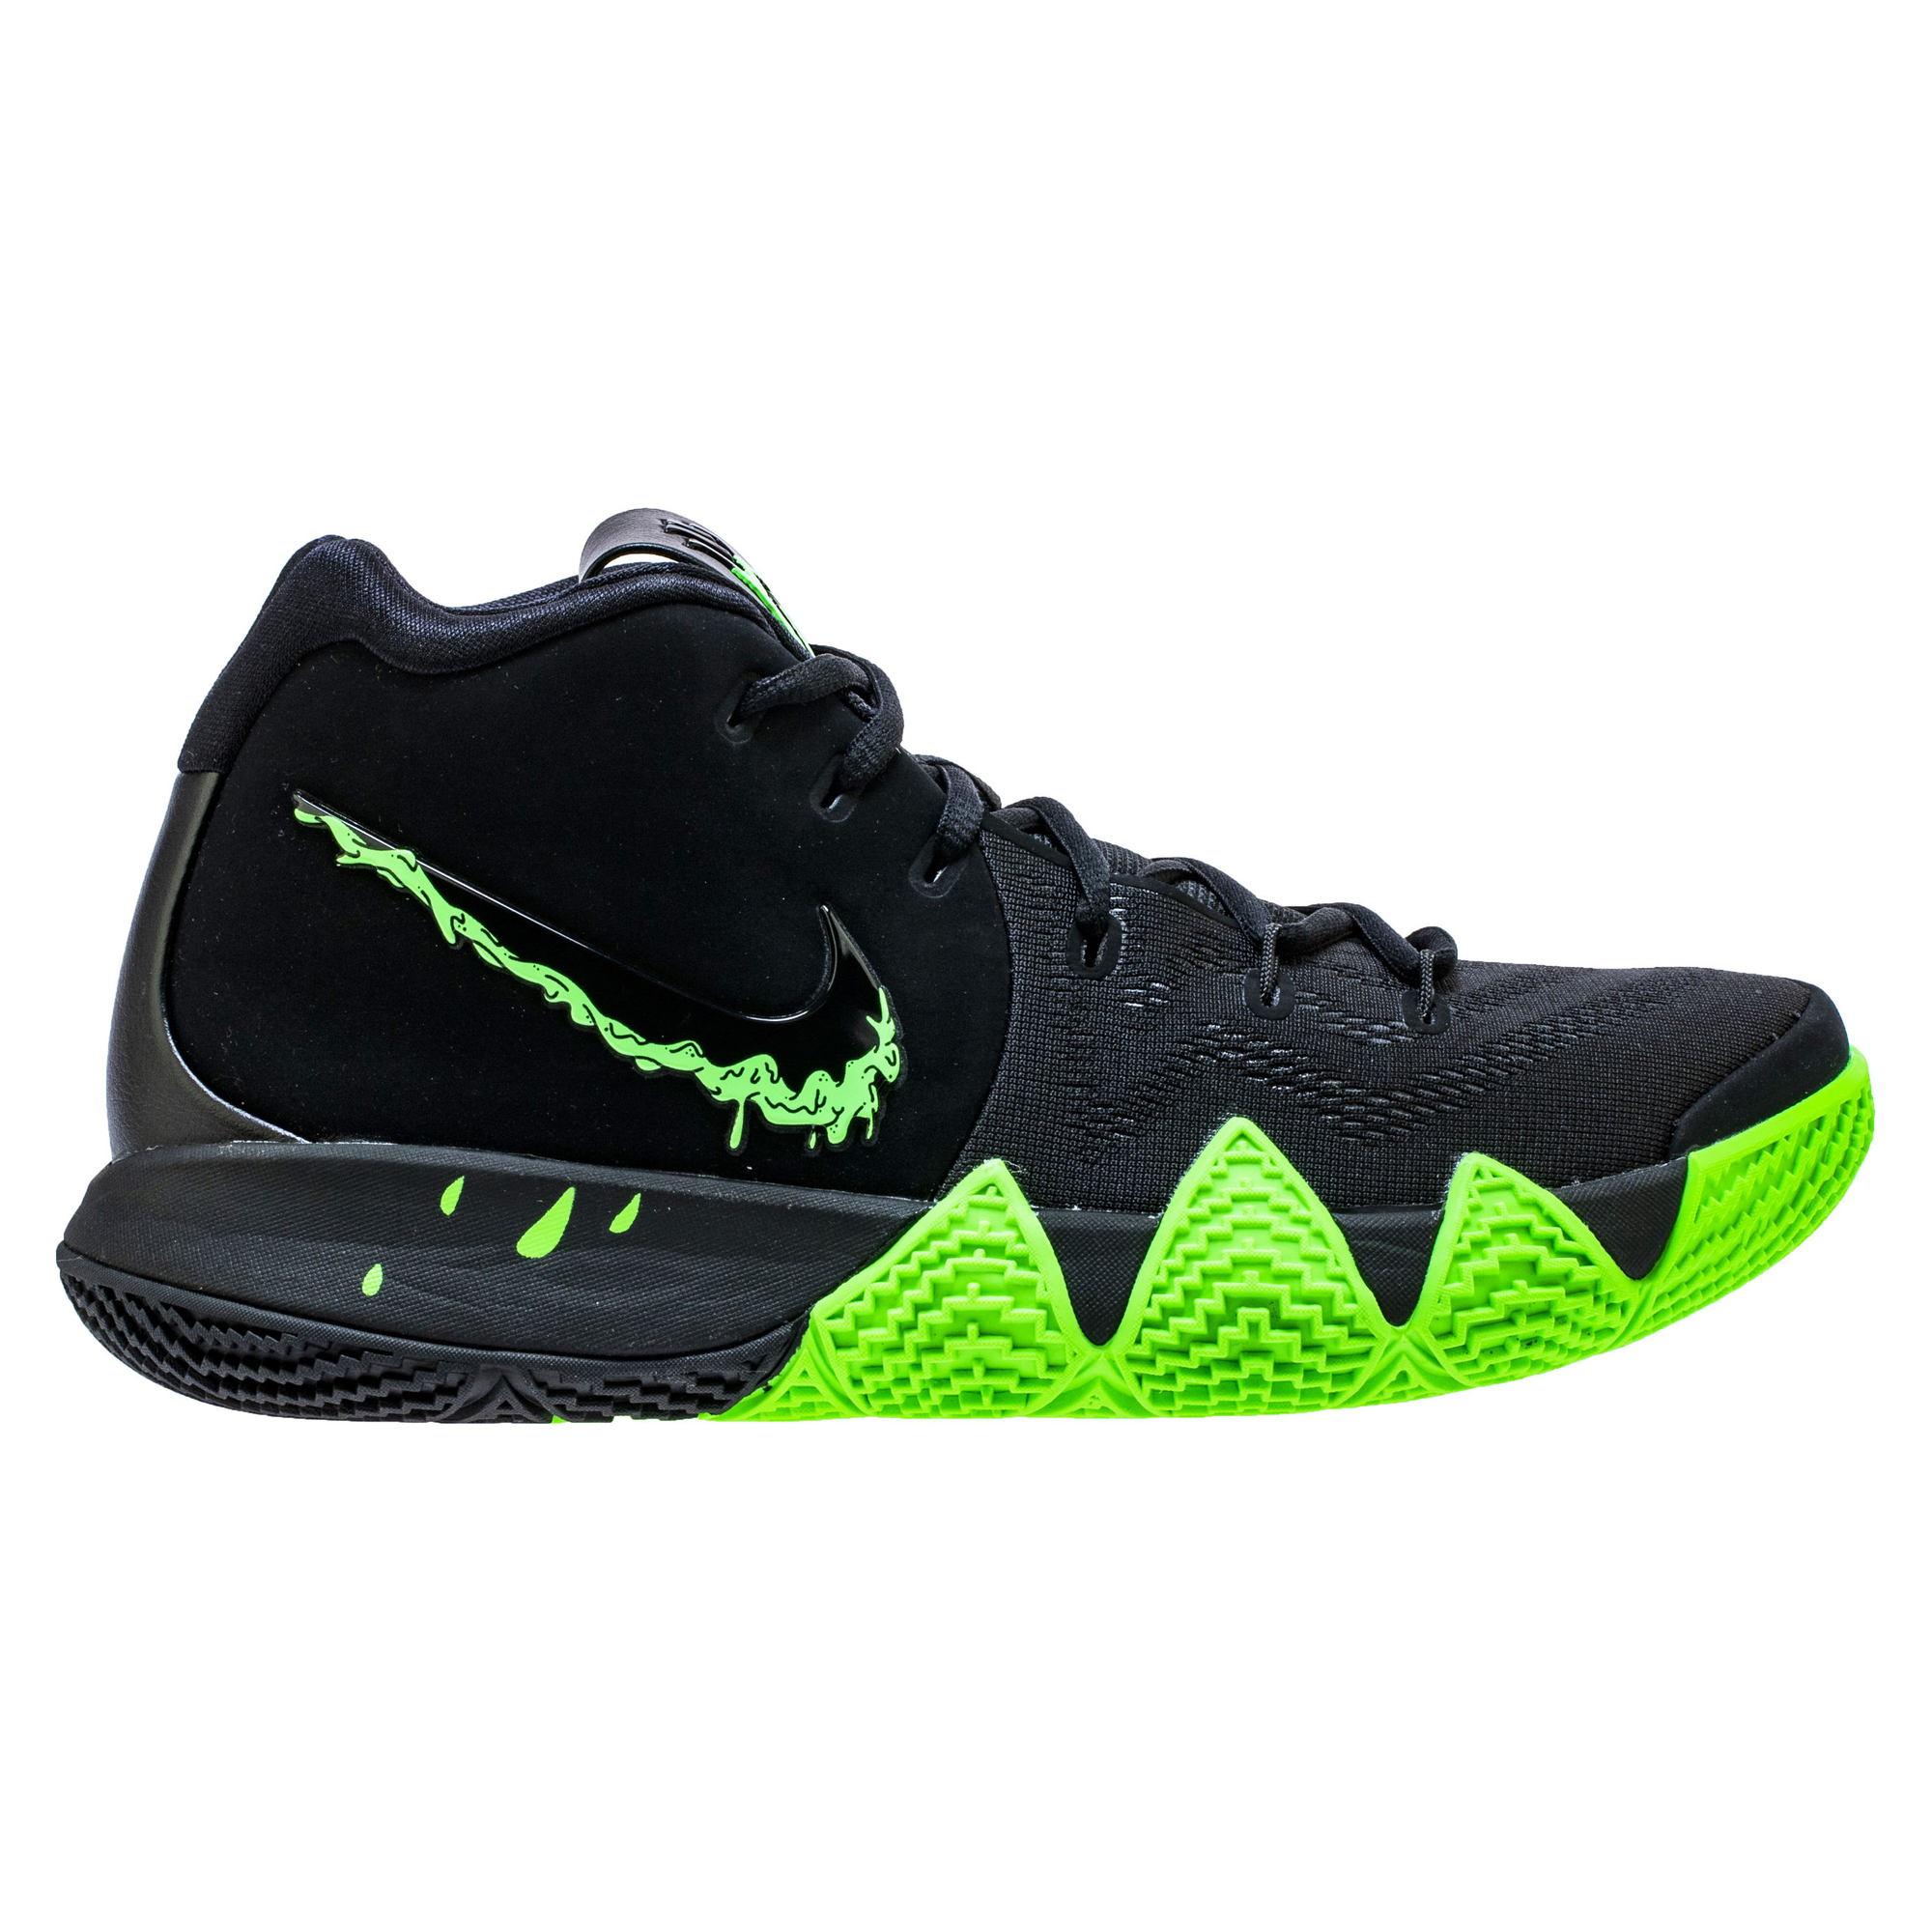 Latest Kyrie 4 Gets Slimed 